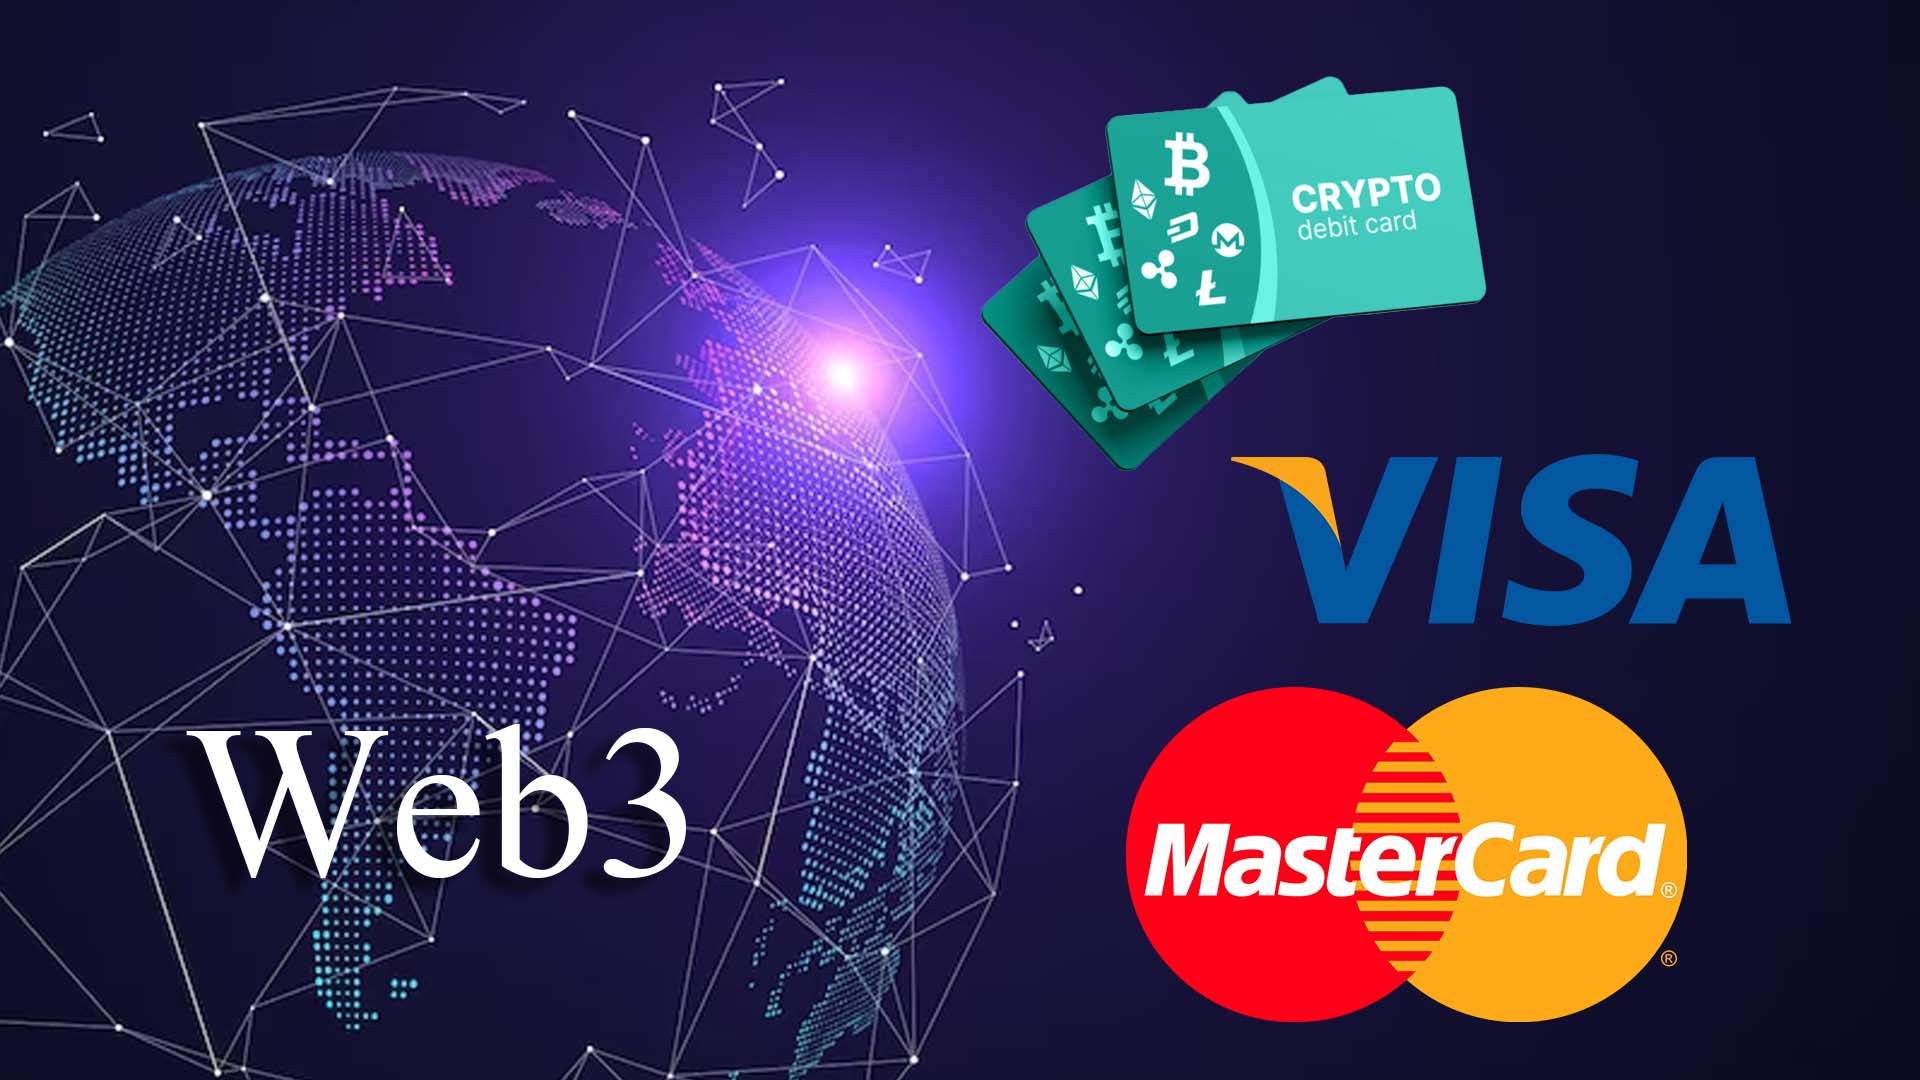 Mastercard, Visa signing debit card deals with crypto startups